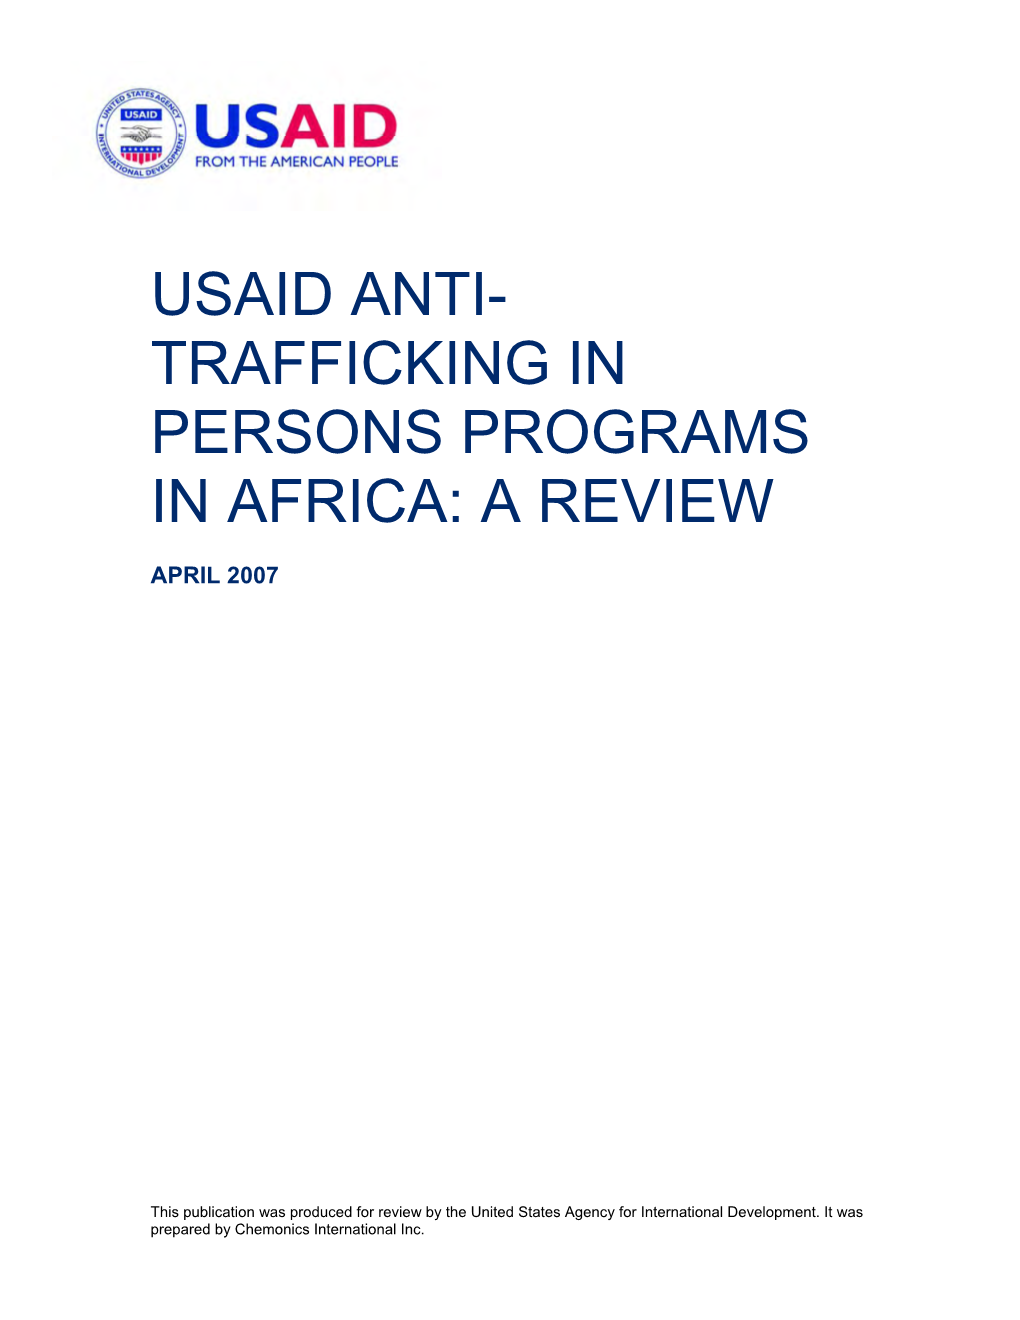 Usaid Anti- Trafficking in Persons Programs in Africa: a Review